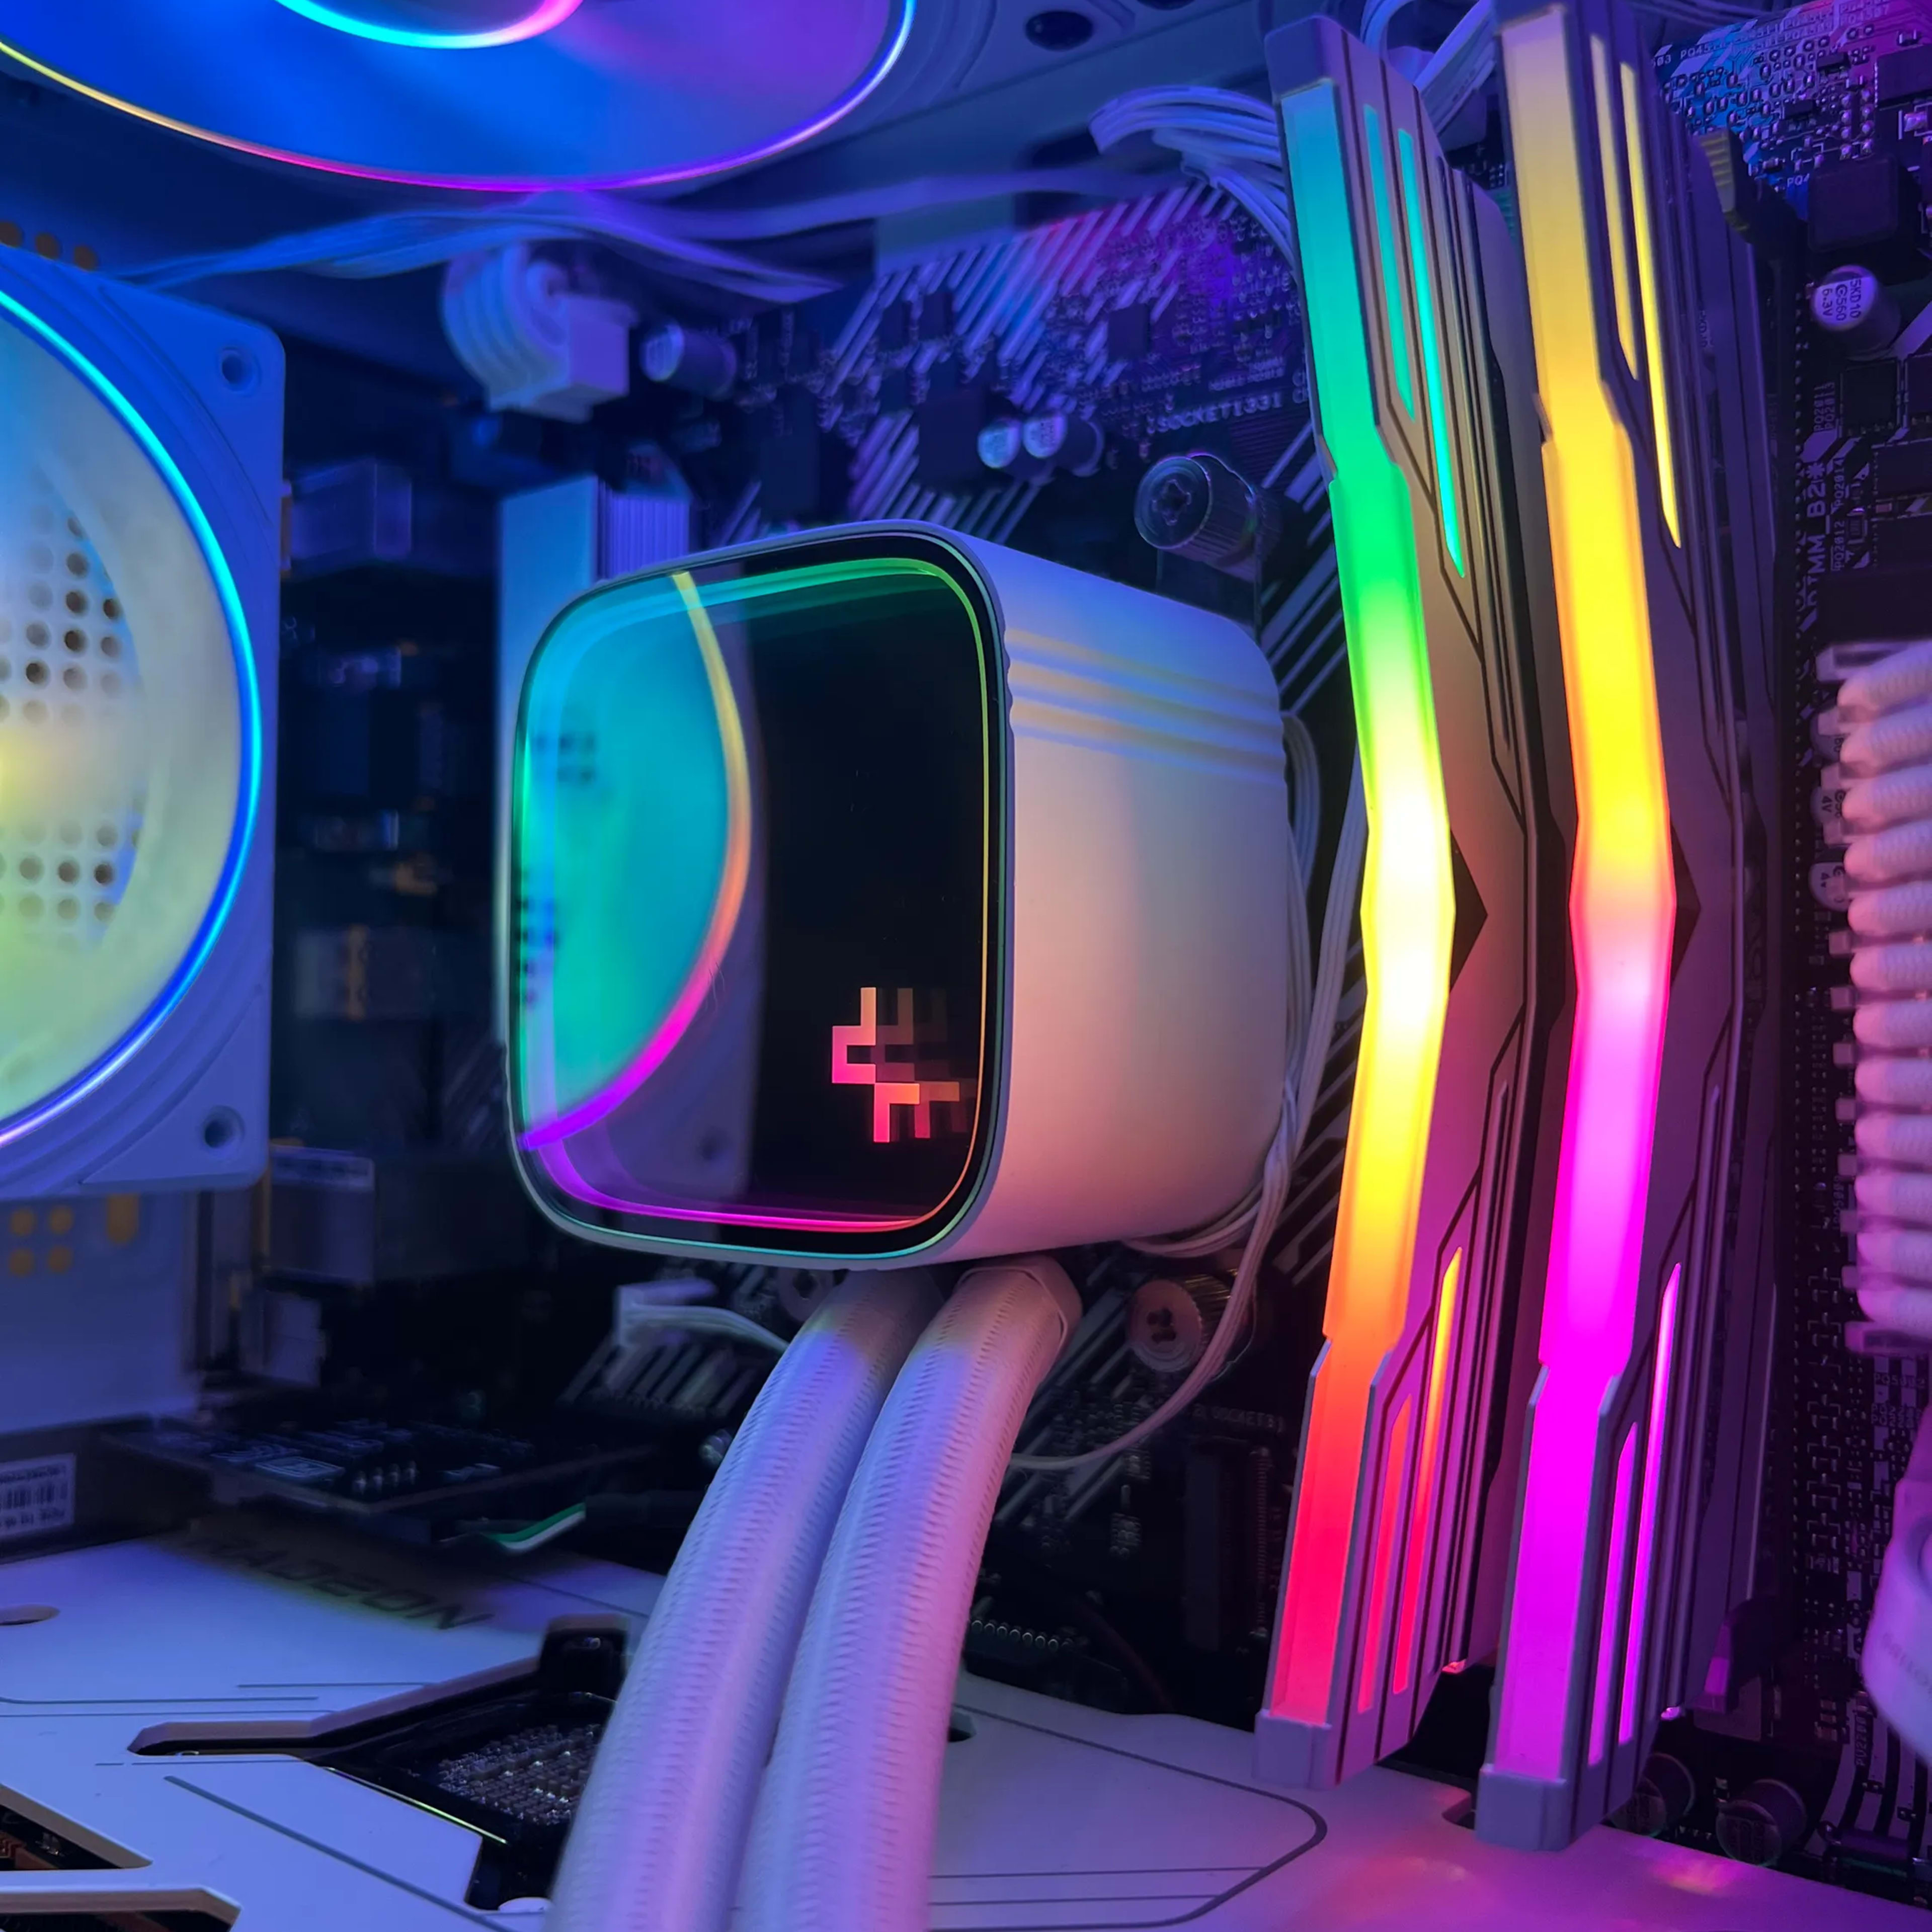 "Northern Lights" 5800x, RX 7800XT, 2tb, white gaming pc with 32gb ram and WI-FI